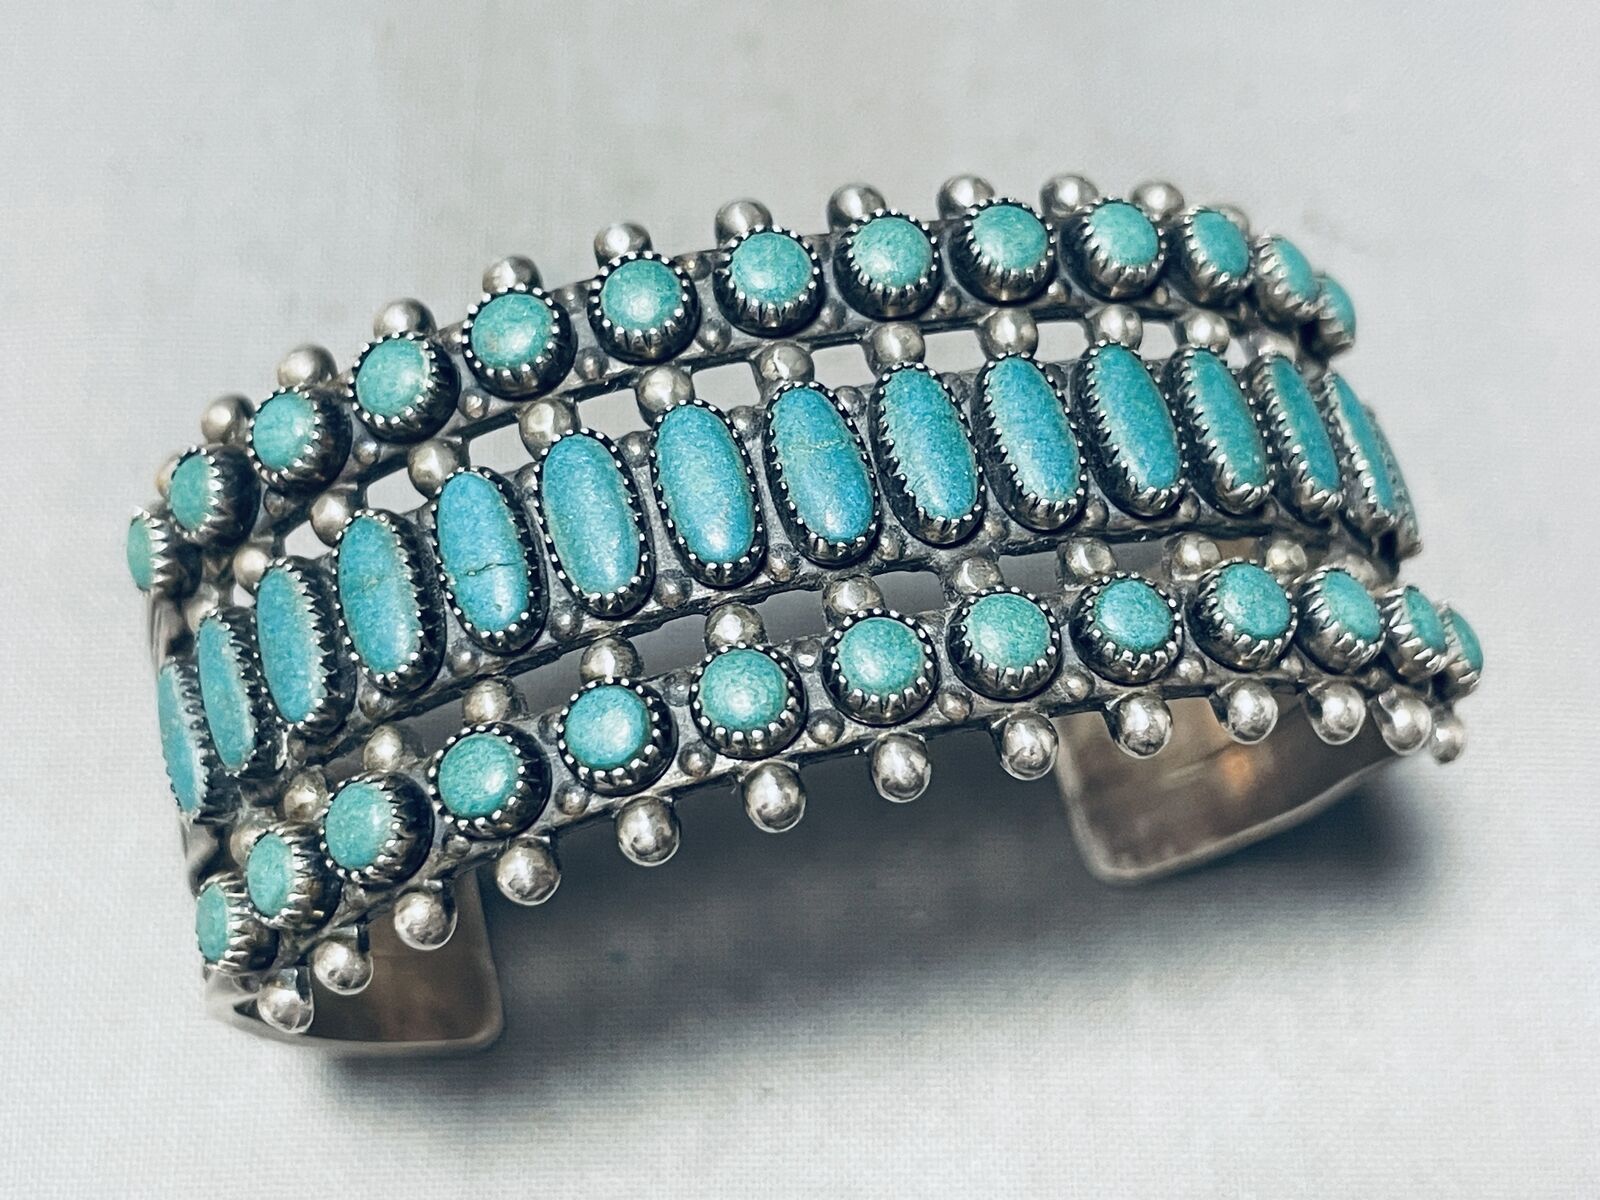 ONE OF THE BEST VINTAGE ZUNI EARLY TURQUOISE STERLING SILVER BRACELET OLD